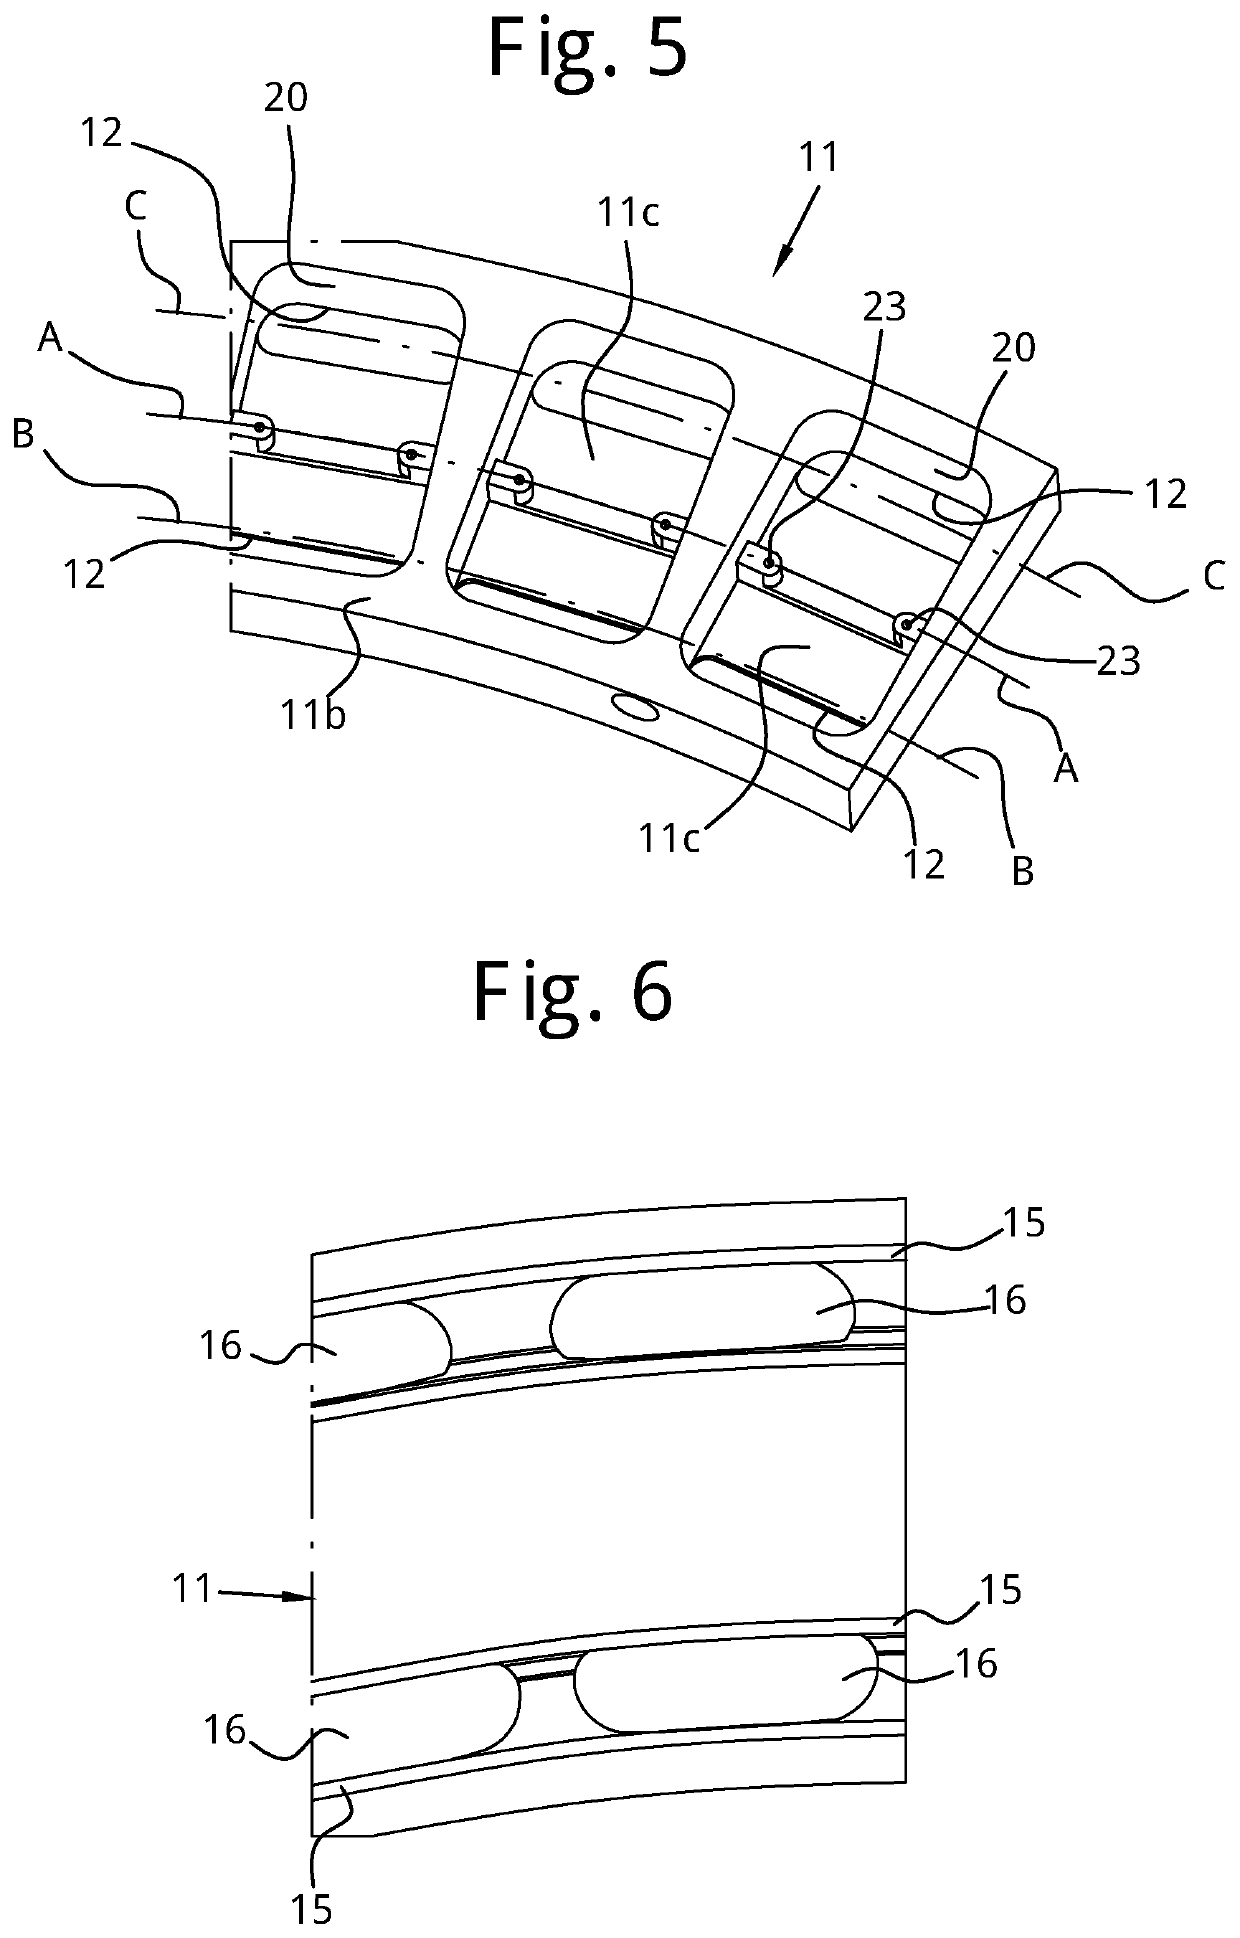 Improved modular structure curved magnetic guide for guiding the chain of a conveyor chain